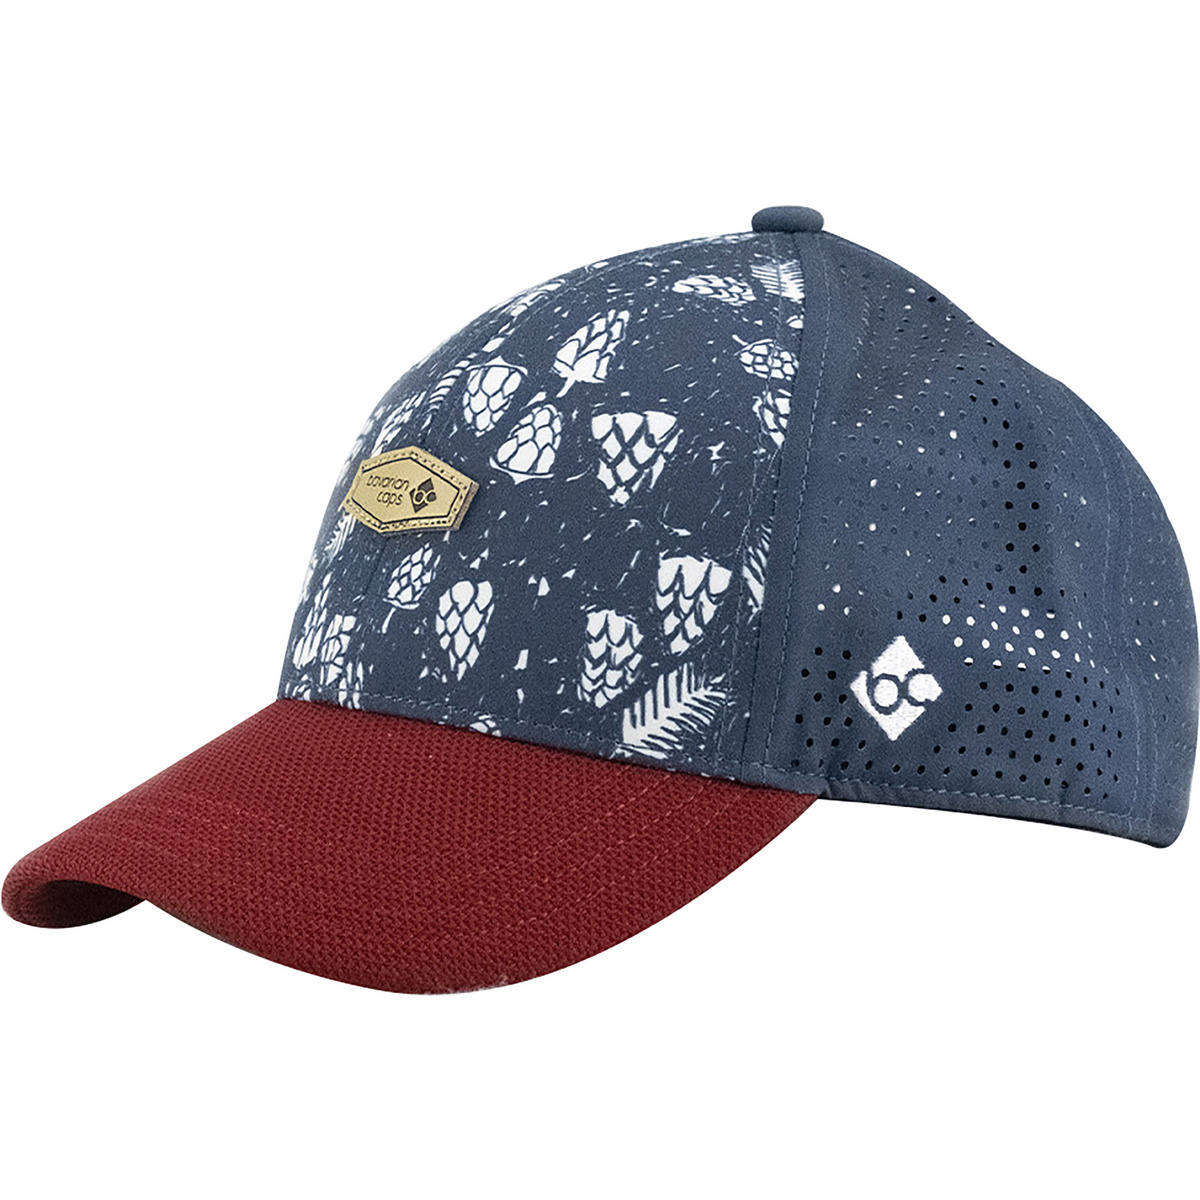 Image of Bavarian Caps Cappellino Hopfenernte Outdoor Curved